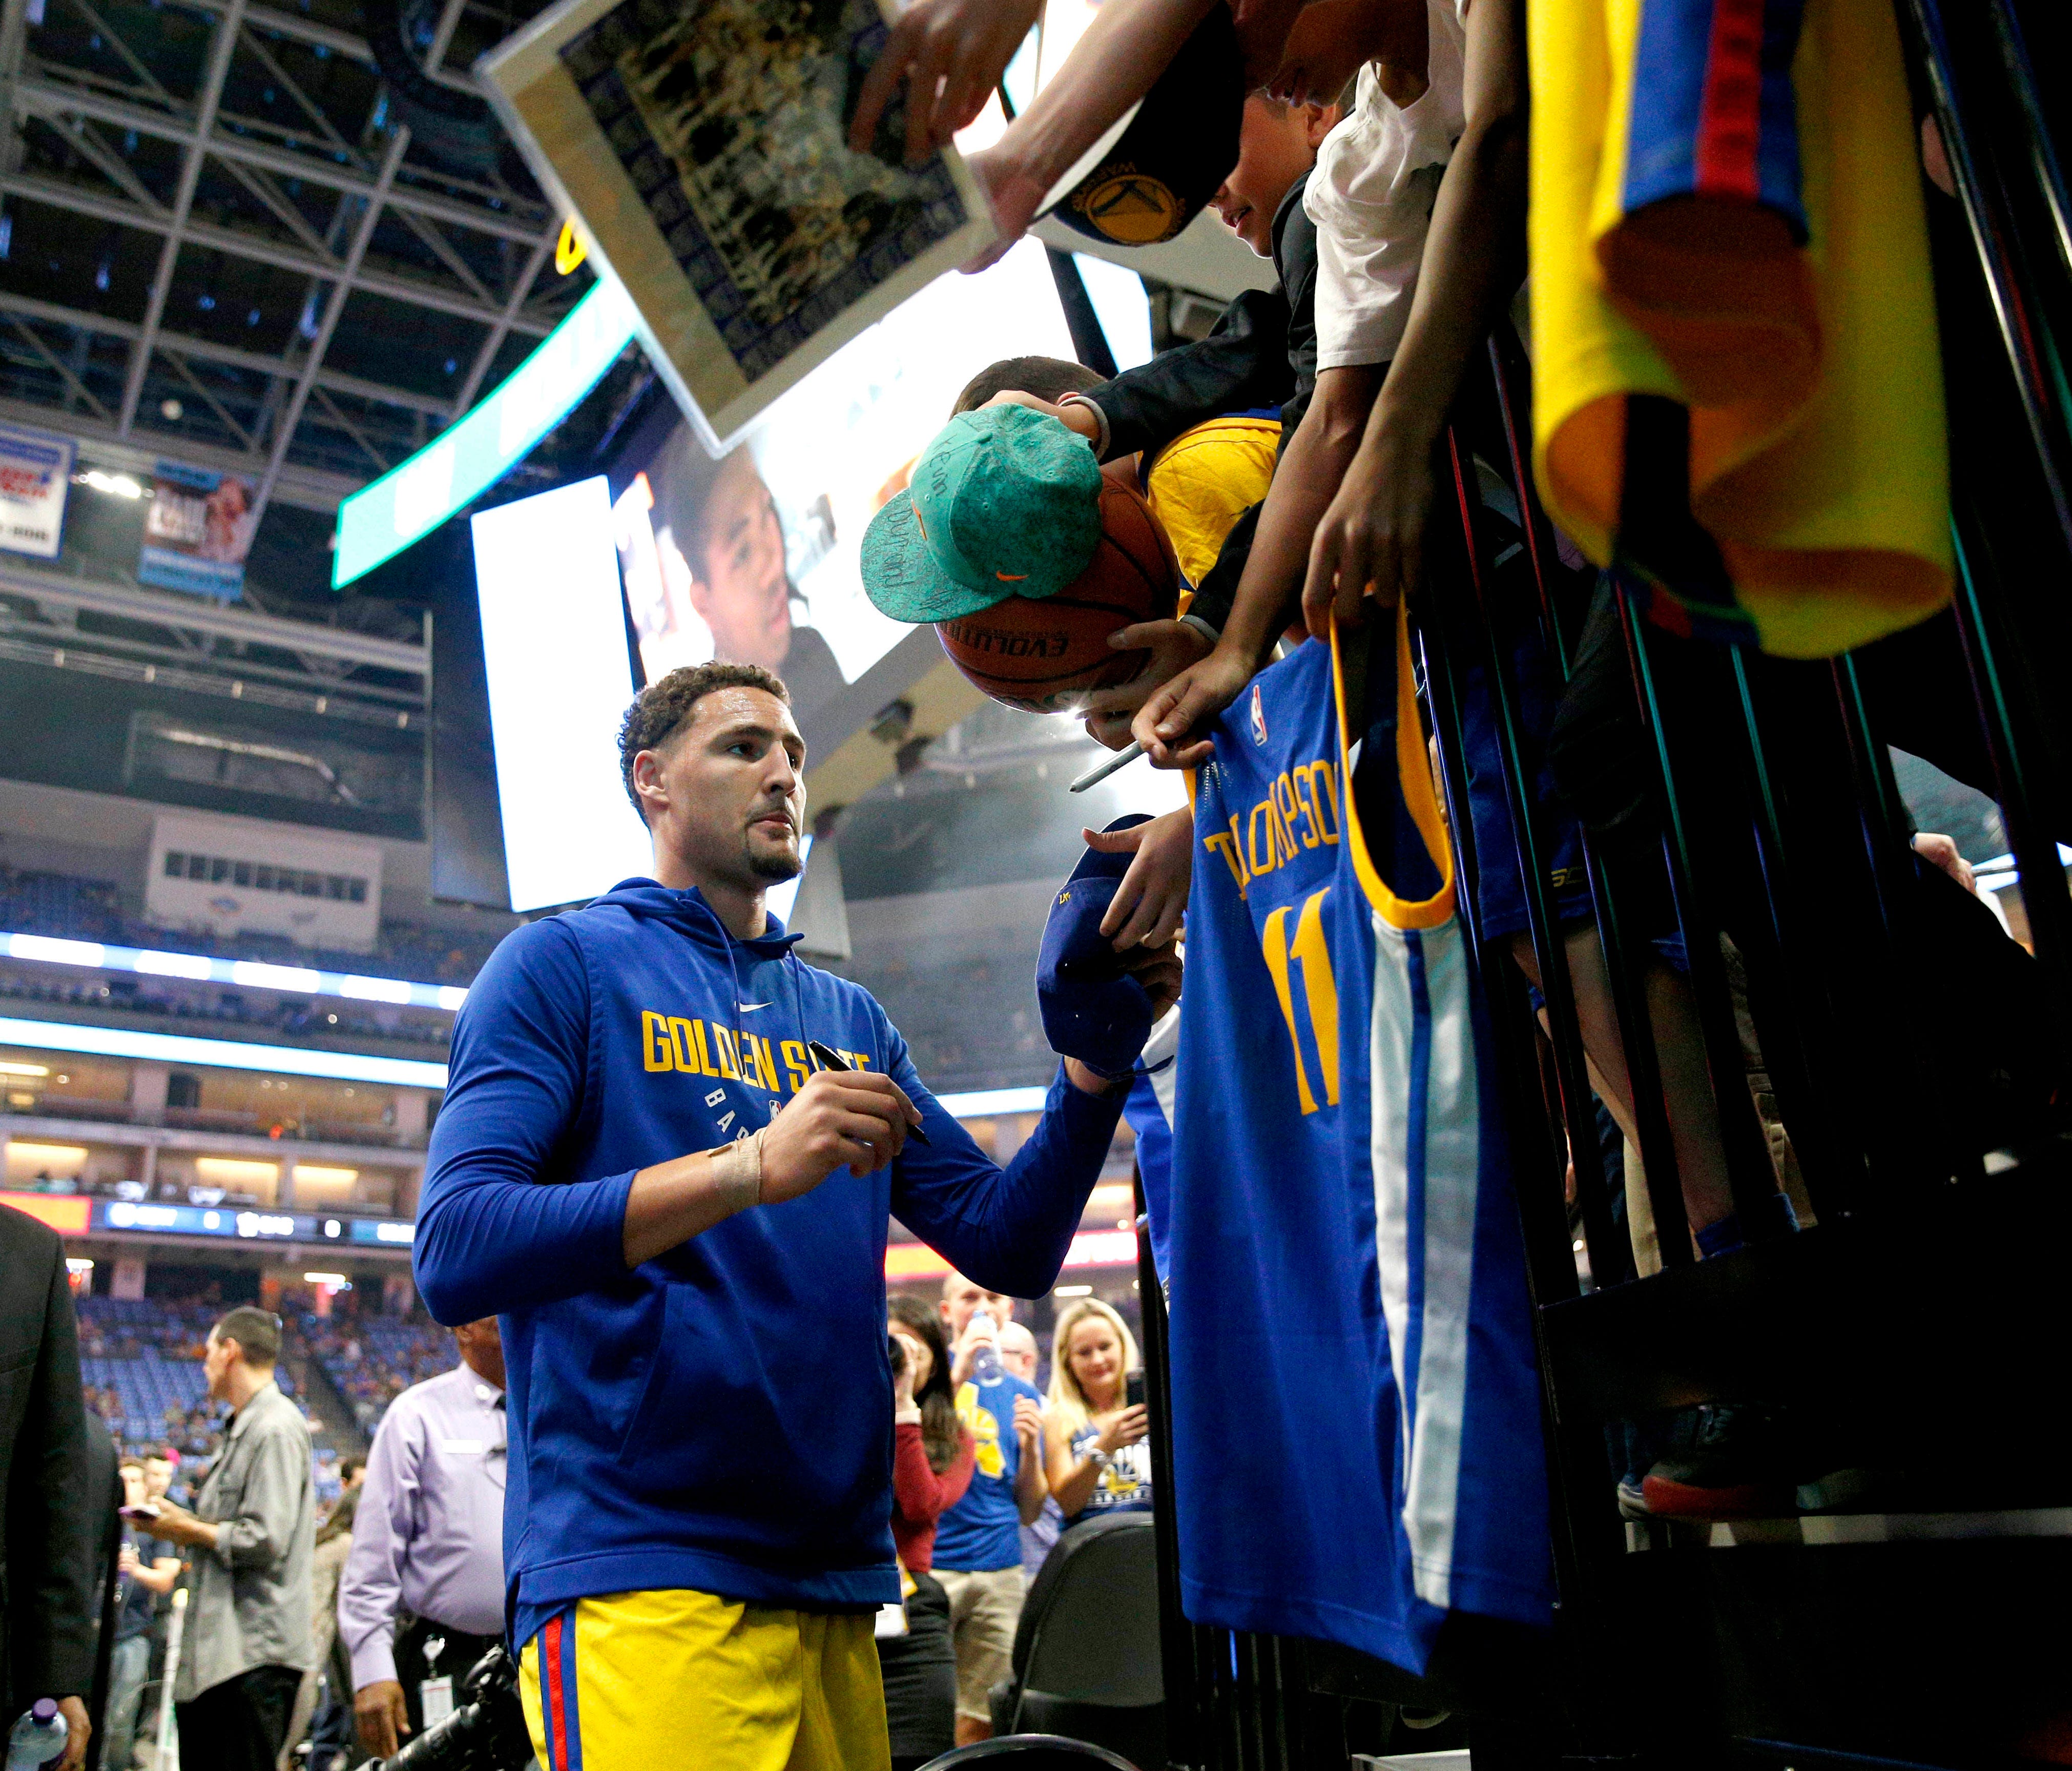 Golden State Warriors guard Klay Thompson (11) signs autographs before the start of a game against the Sacramento Kings at the Golden 1 Center.